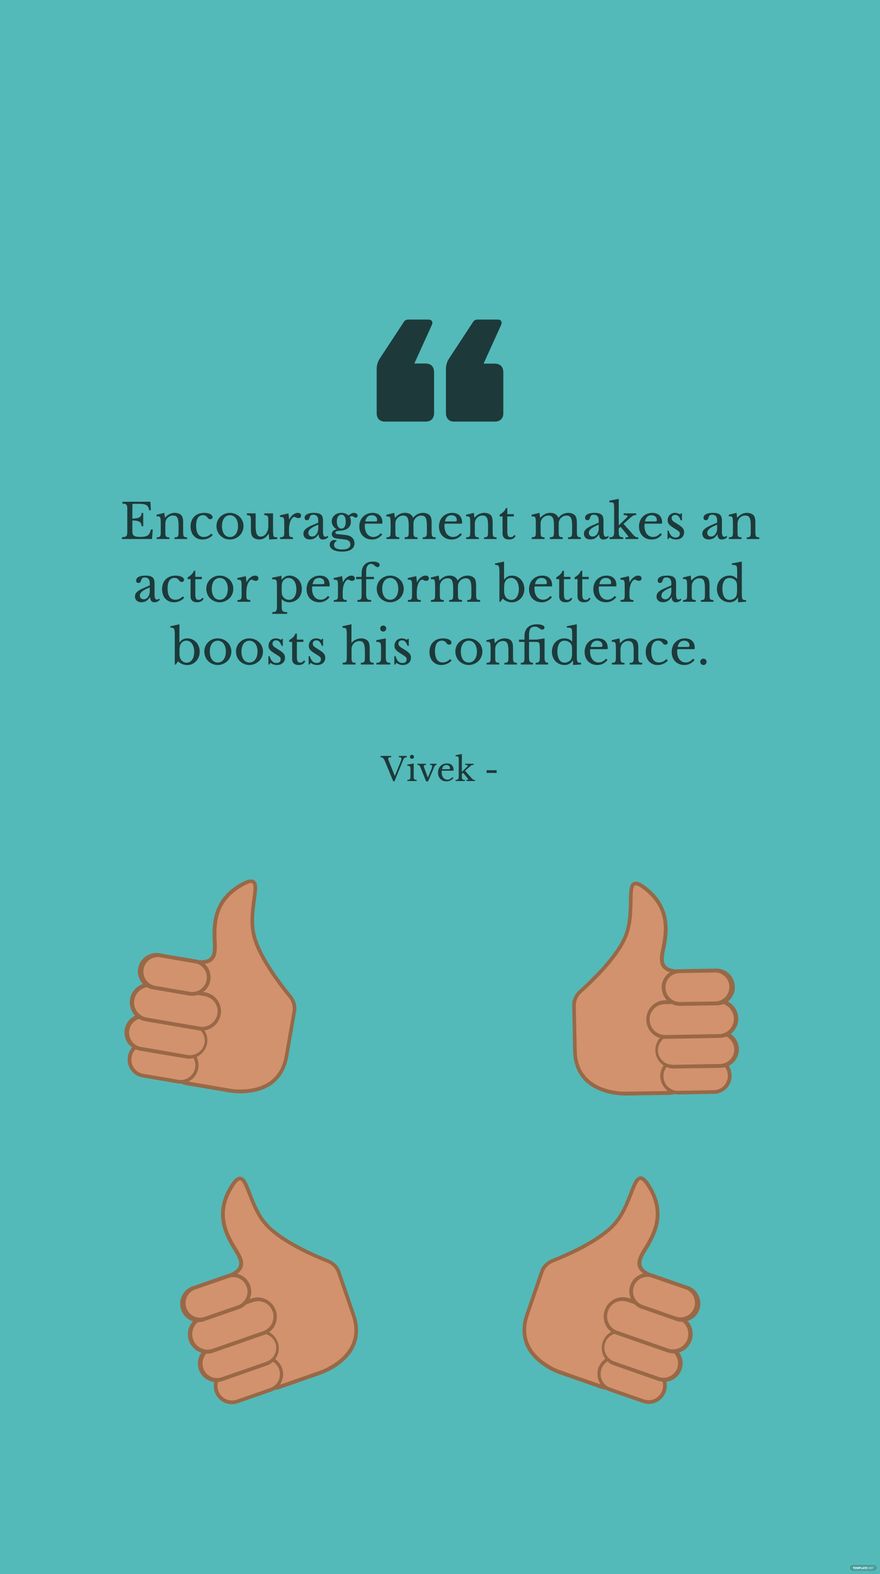 Vivek - Encouragement makes an actor perform better and boosts his confidence. Template